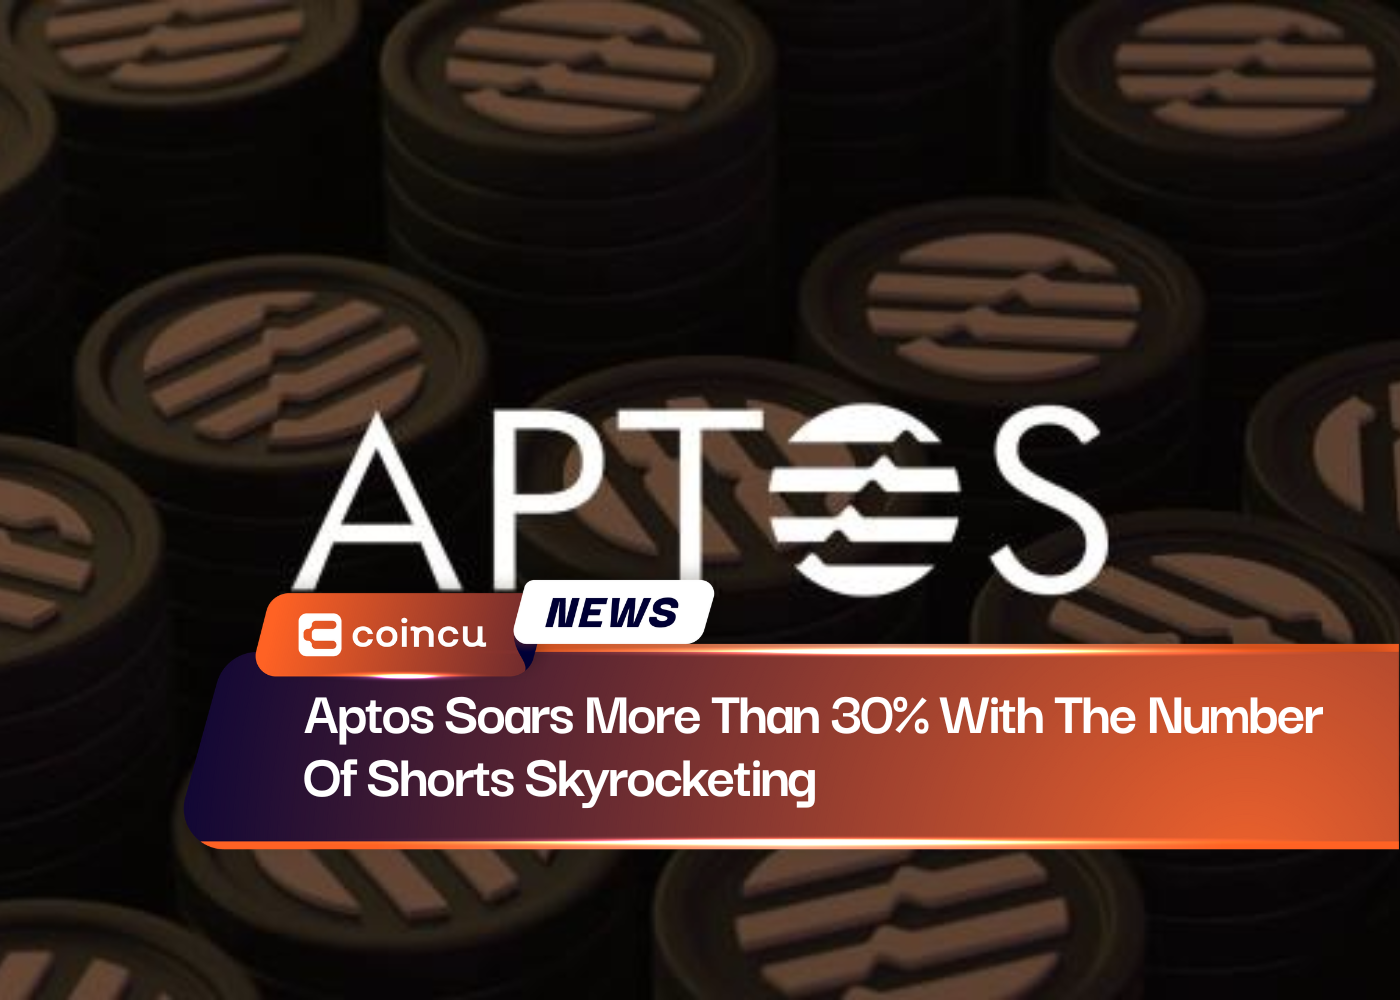 Aptos Soars More Than 30% With The Number Of Shorts Skyrocketing